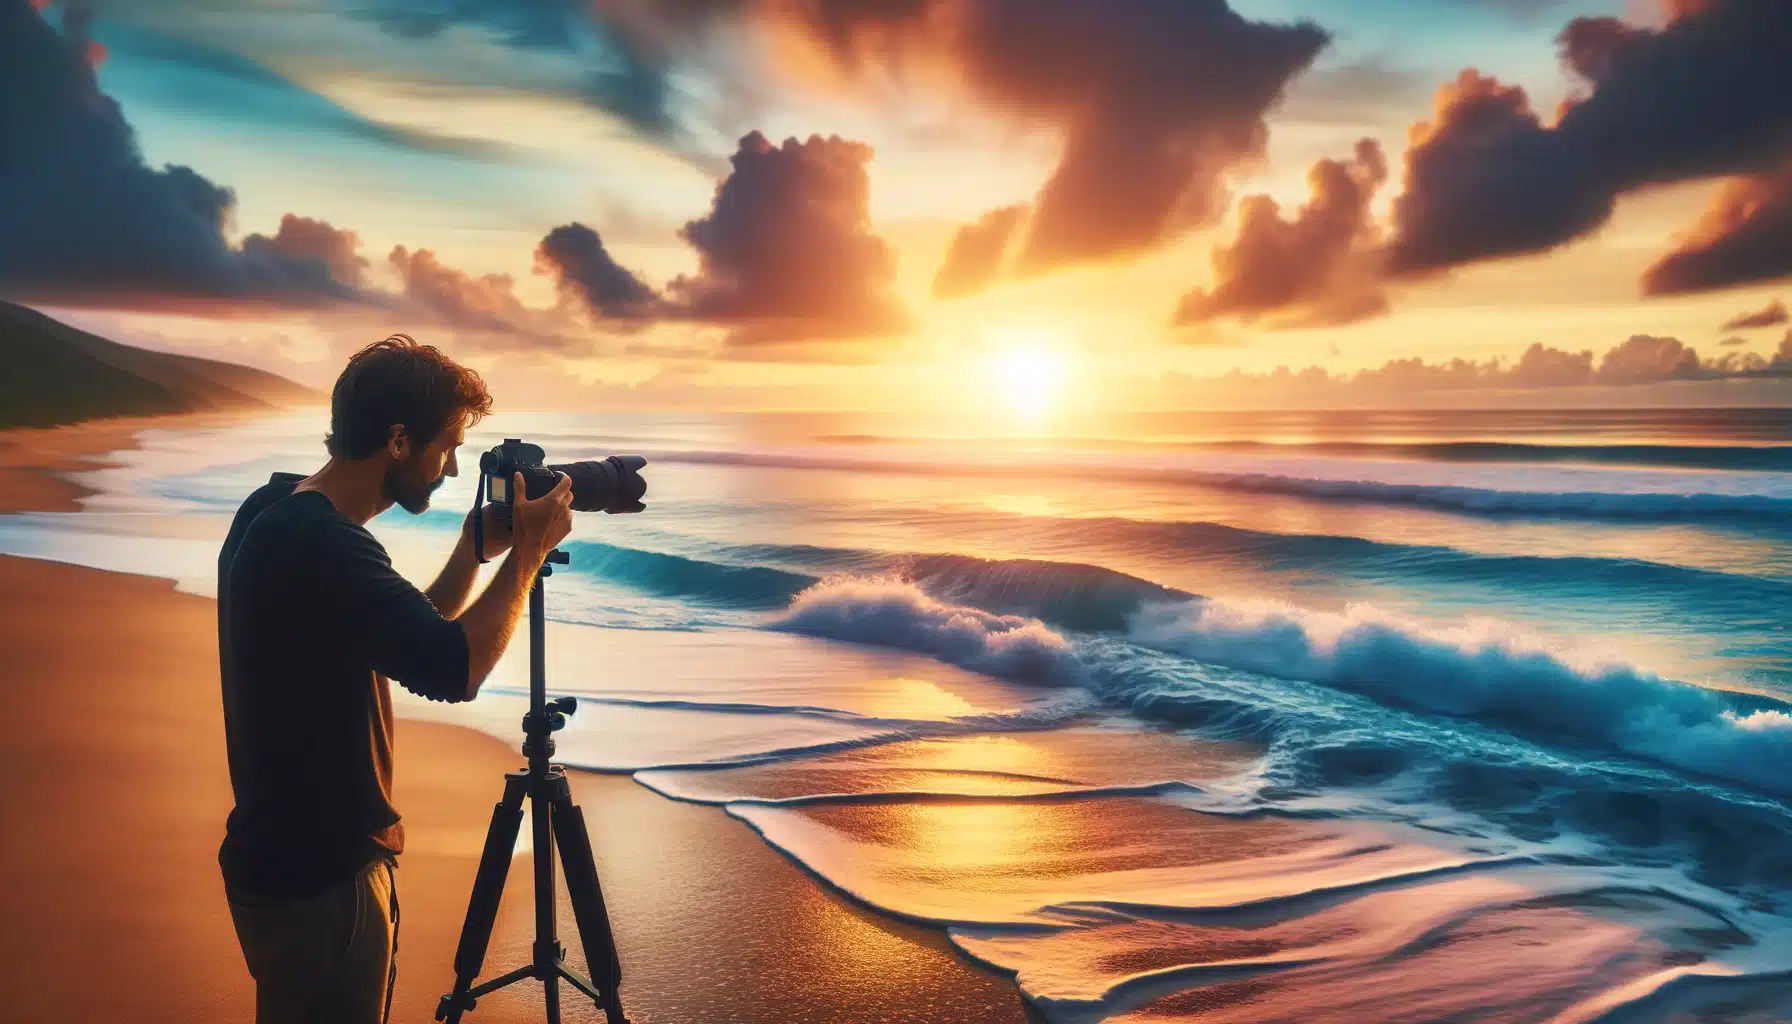 A captivating seascape scene at sunrise with a person adjusting camera settings on a tripod by the ocean, capturing the vibrant colors of the sky and waves.